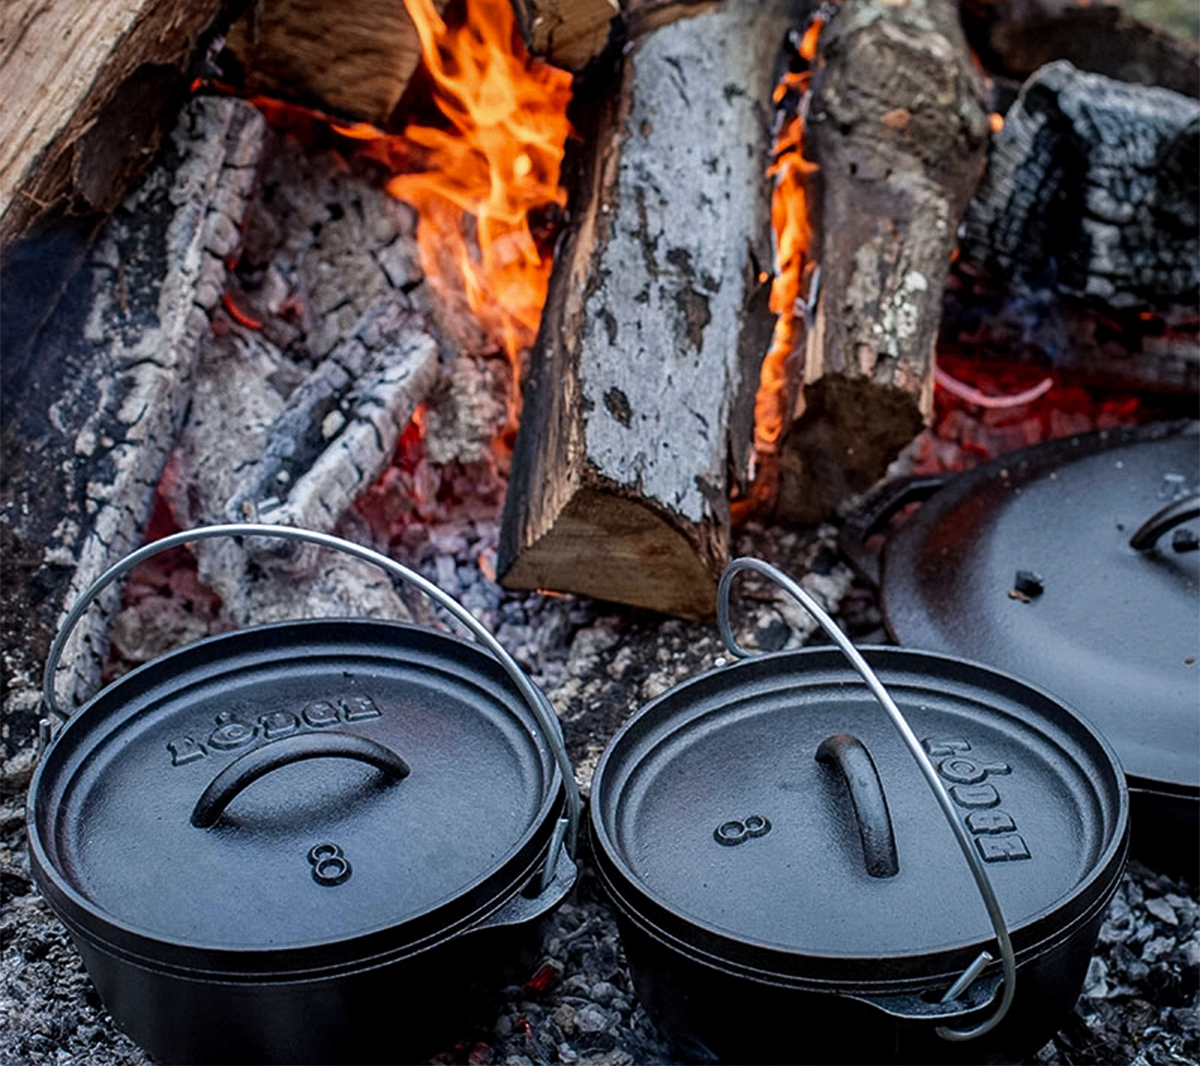 Cast iron campfire cooking kit has been a go-to option for open-fire cooking since long before our pioneer ancestors prepared meals on the wild frontier.